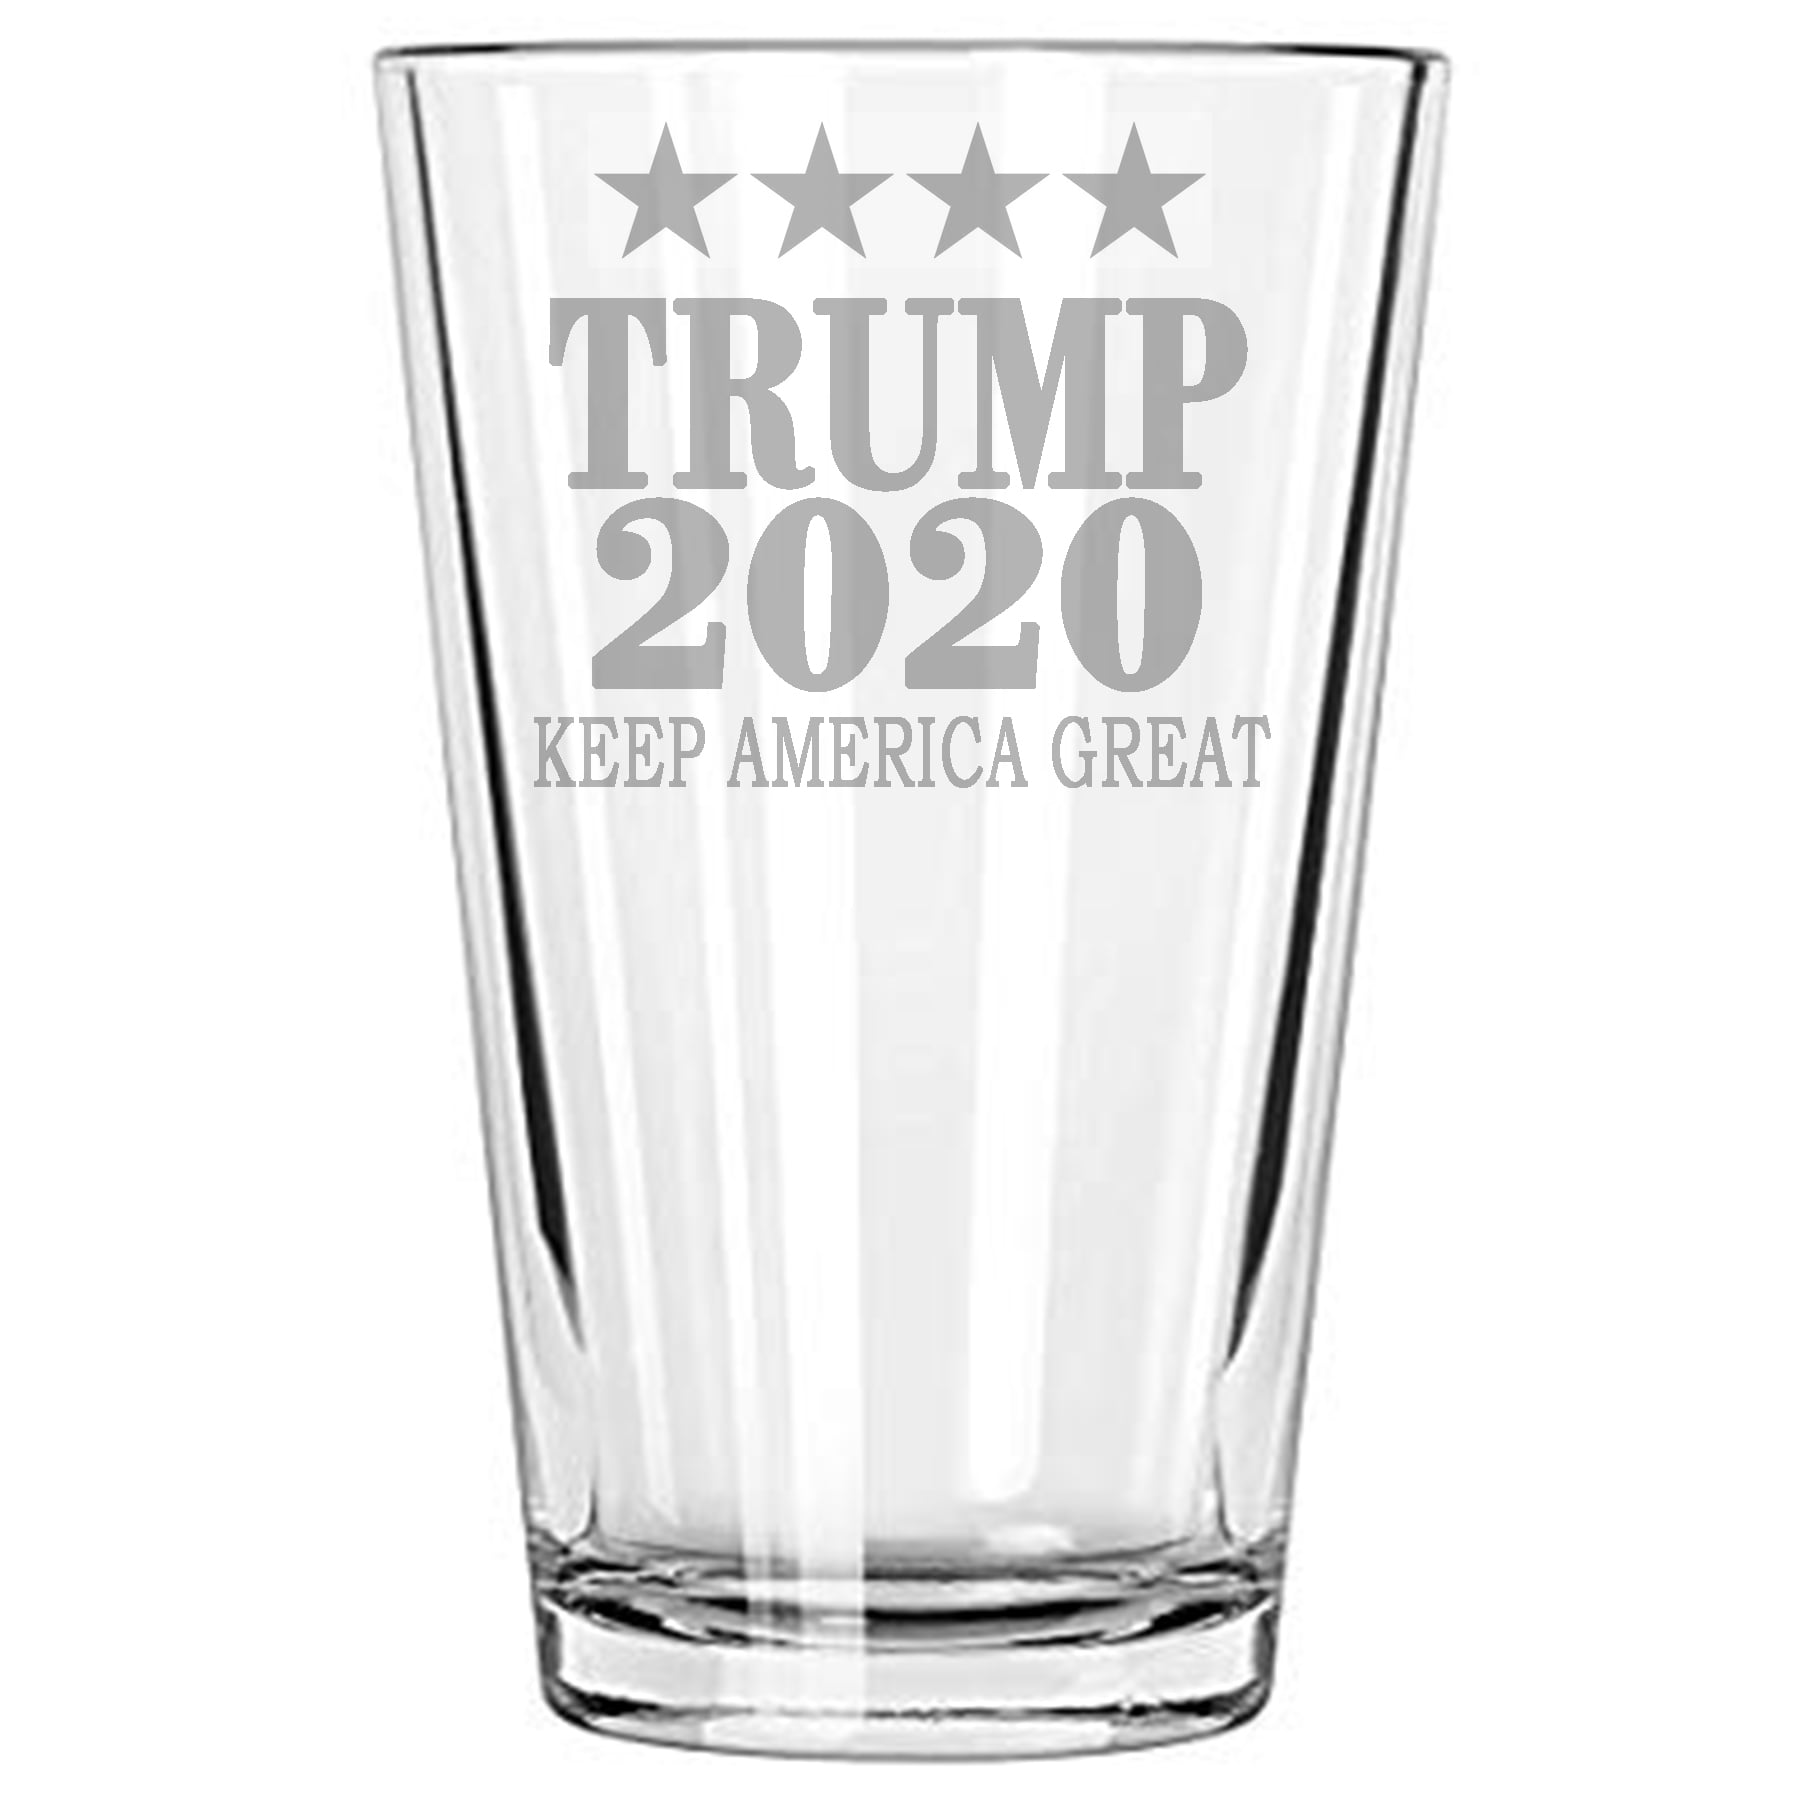 NO MORE BULLSHIT Patriots Cave TRUMP Beer Pint Glass 16oz Restaurant Quality Drinking/Mixing Glassware KEEP AMERICA GREAT 